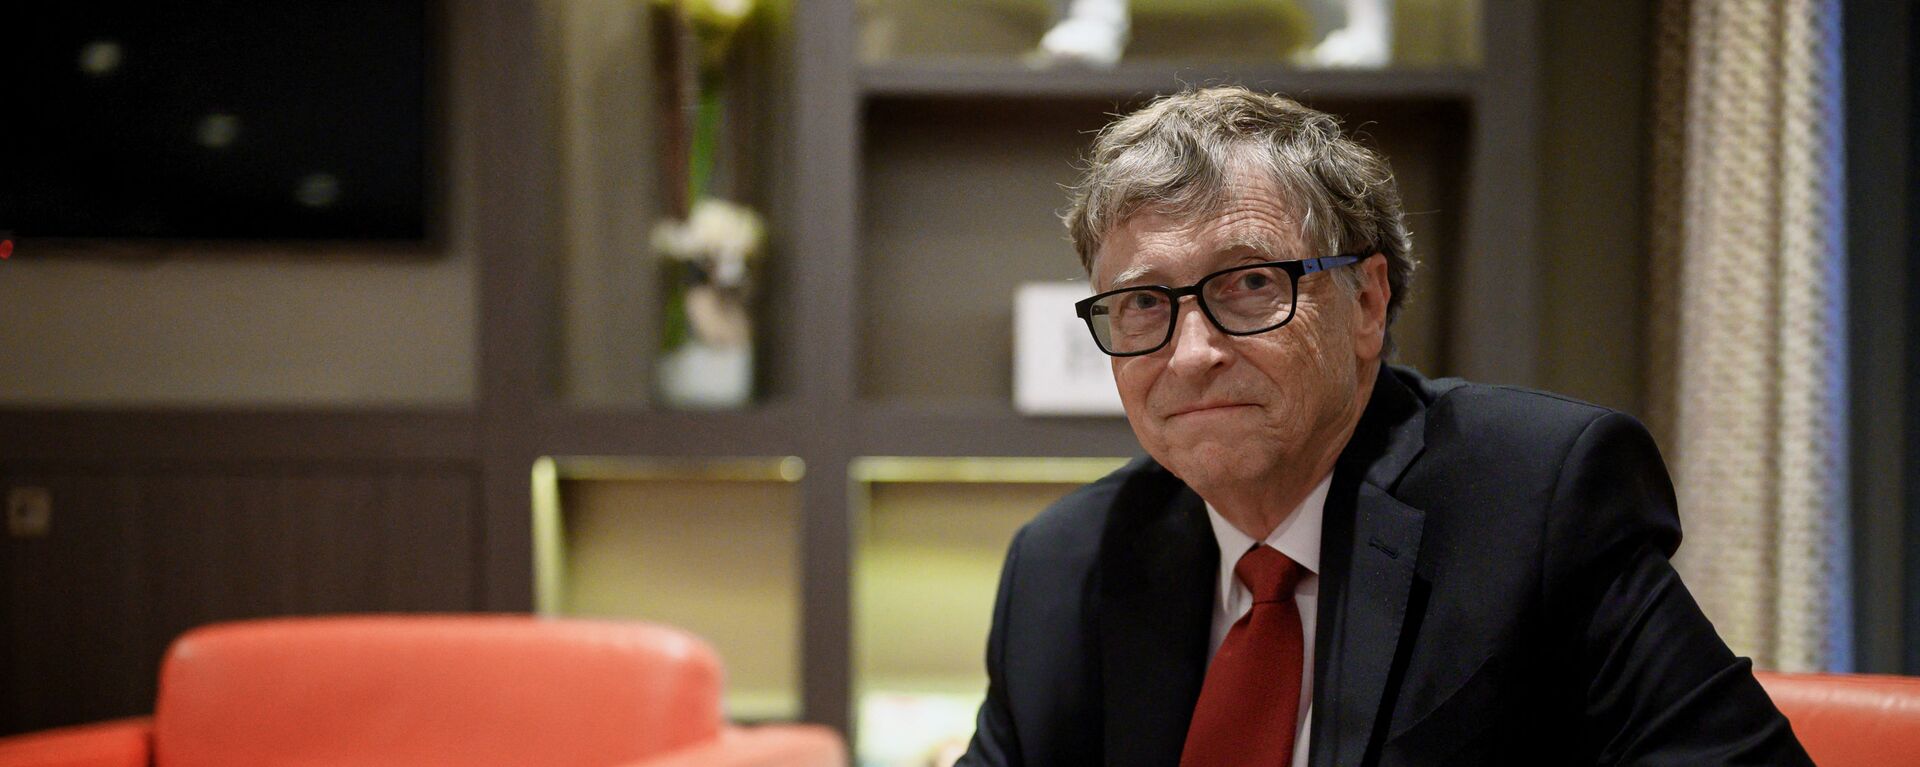 US Microsoft founder, Co-Chairman of the Bill & Melinda Gates Foundation, Bill Gates, poses for a picture on October 9, 2019, in Lyon, central eastern France, during the funding conference of Global Fund to Fight AIDS, Tuberculosis and Malaria.  - Sputnik International, 1920, 30.08.2021